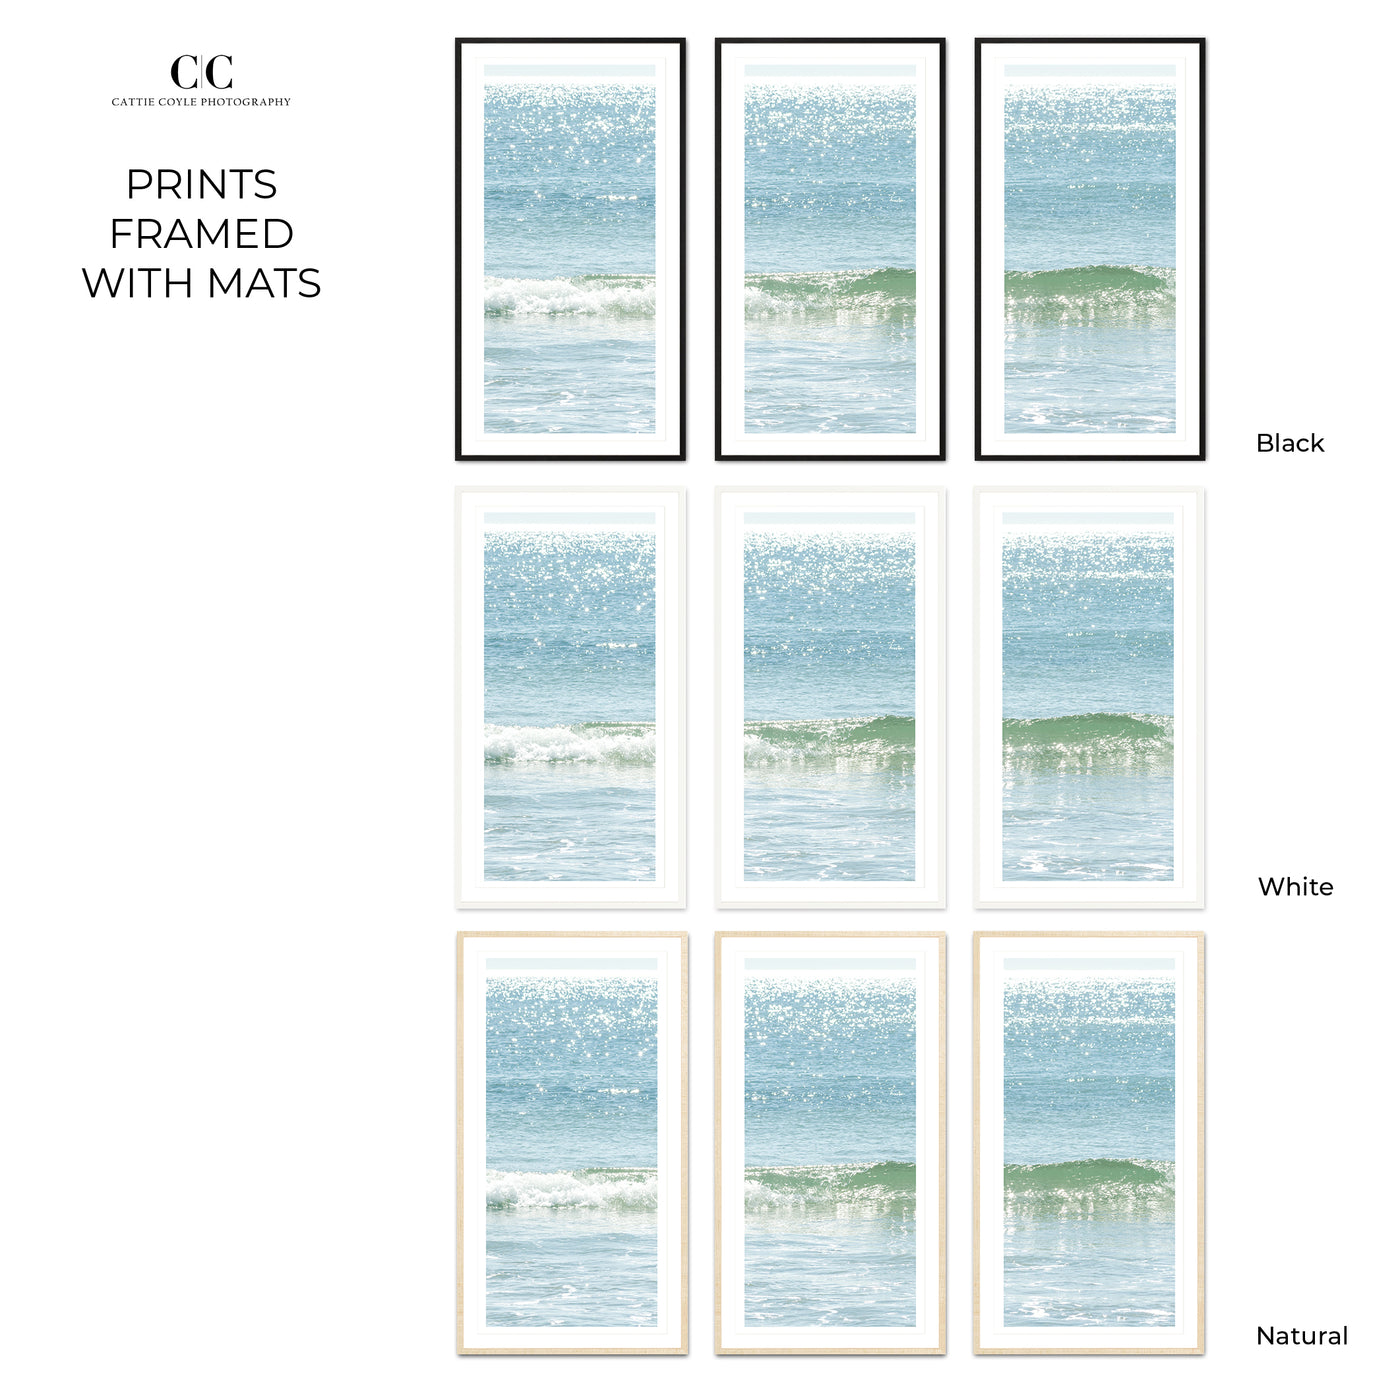 Ocean Waves No 11 - 3 piece wall art framed with mats by Cattie Coyle Photography